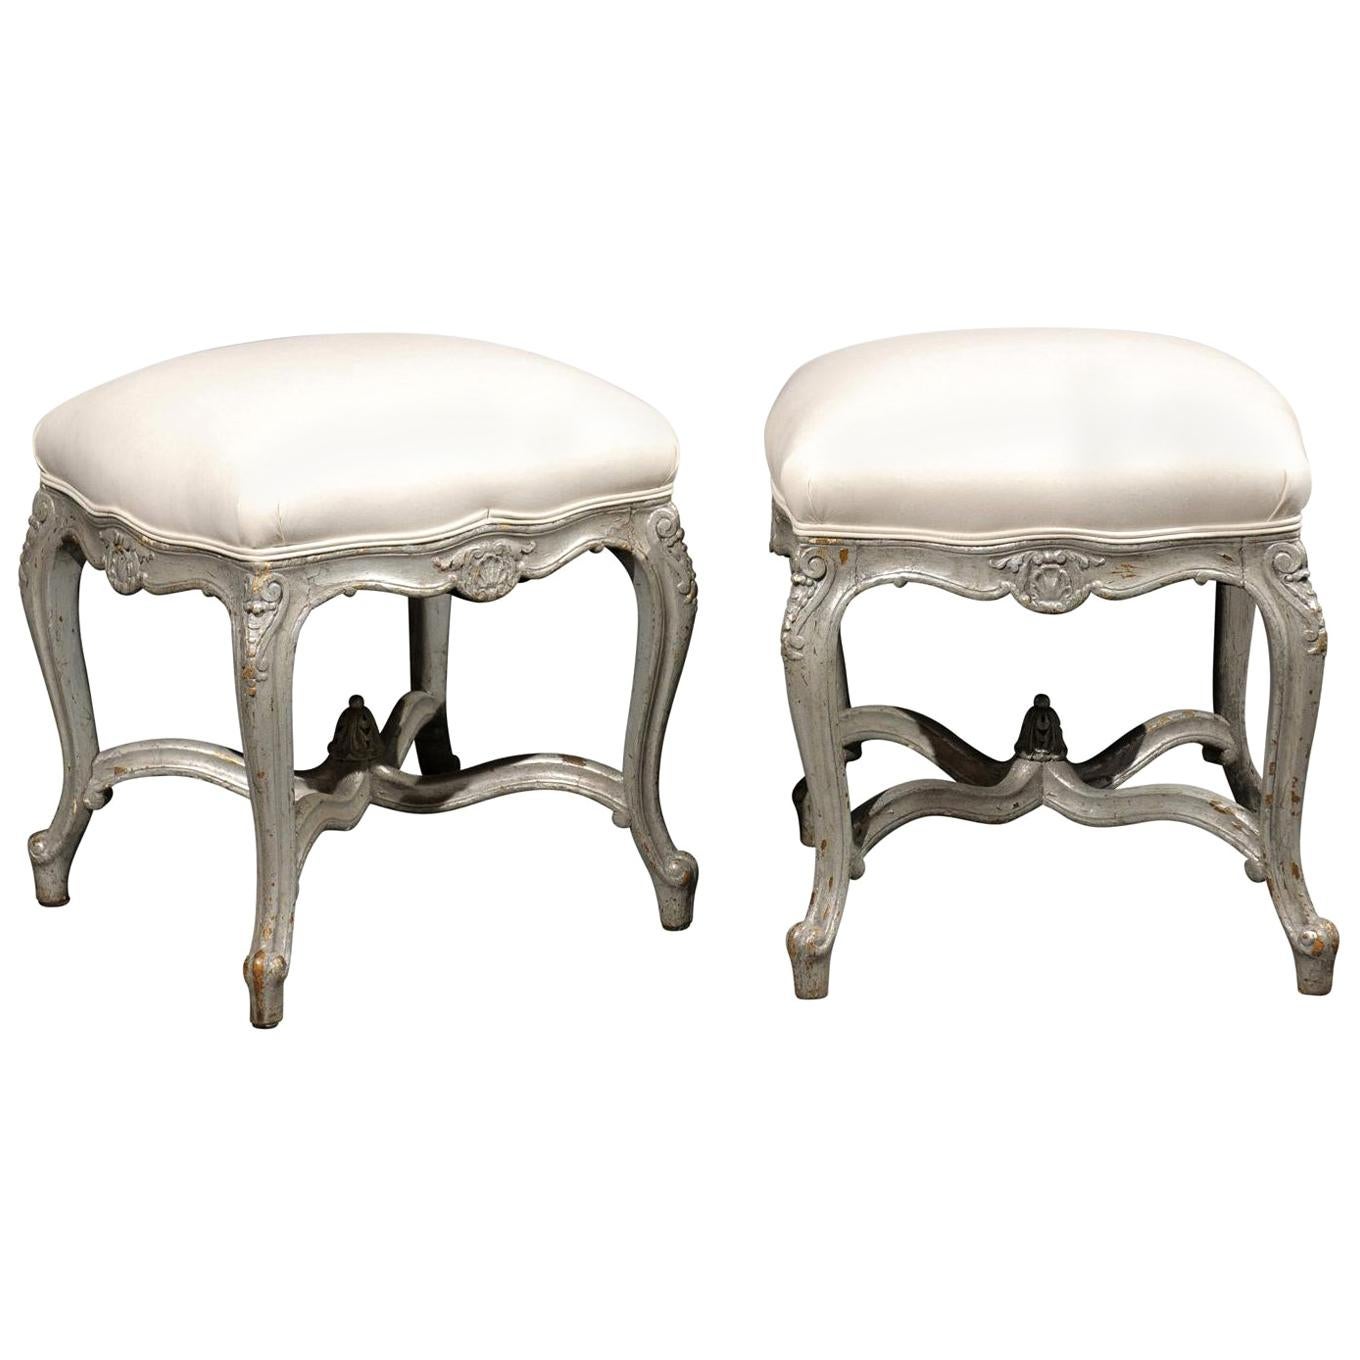 Pair of French Louis XV Style Silver Leaf Stools with Carved Cross Stretcher